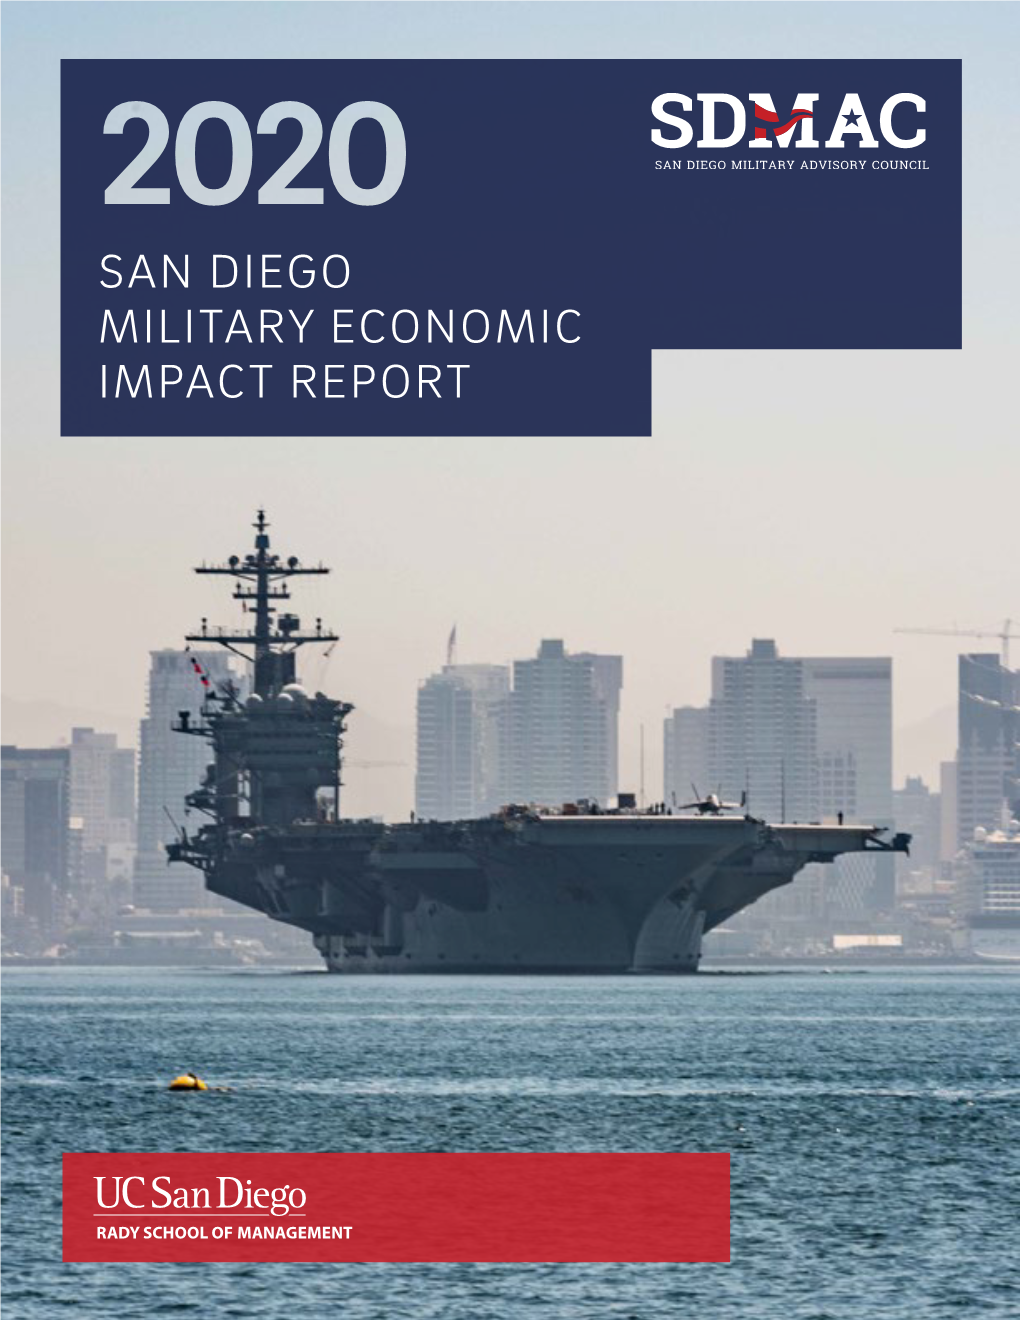 San Diego Military Economic Impact Report It’S All About the Courageous Men and Women in Uniform and Their Families Who Serve So Honorably and Sacrifice So Much